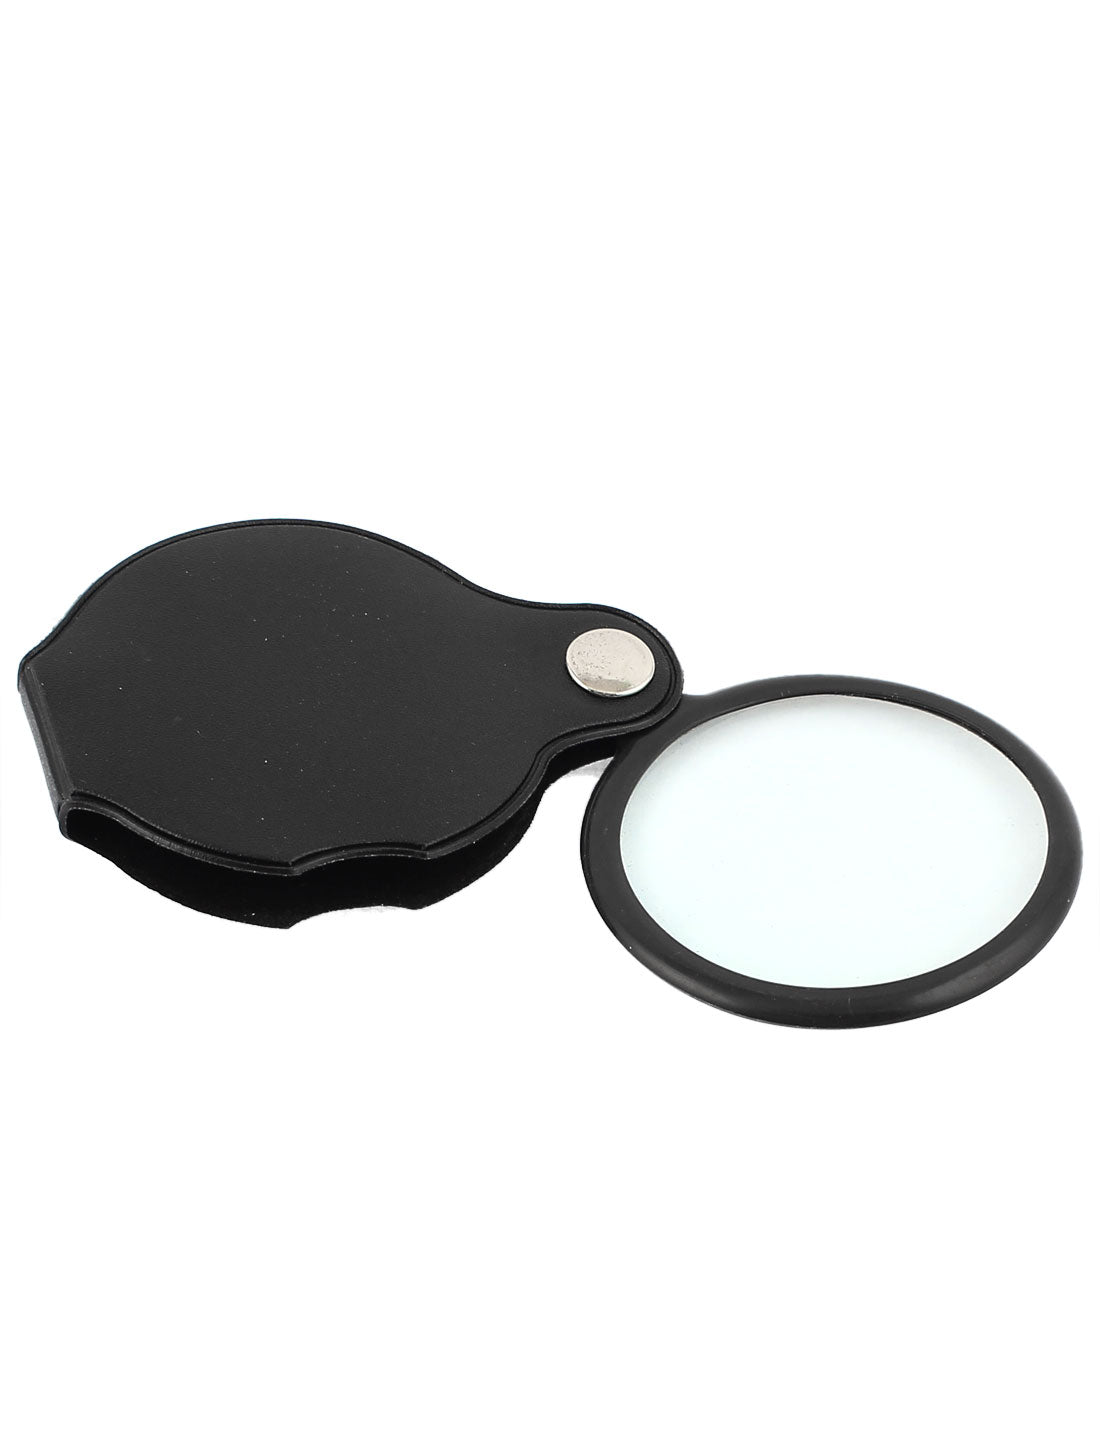 uxcell Uxcell 5X Portable Faux Leather Cover Plastic Frame 50mm Lens Foldable Magnifier Magnifying Glass Black